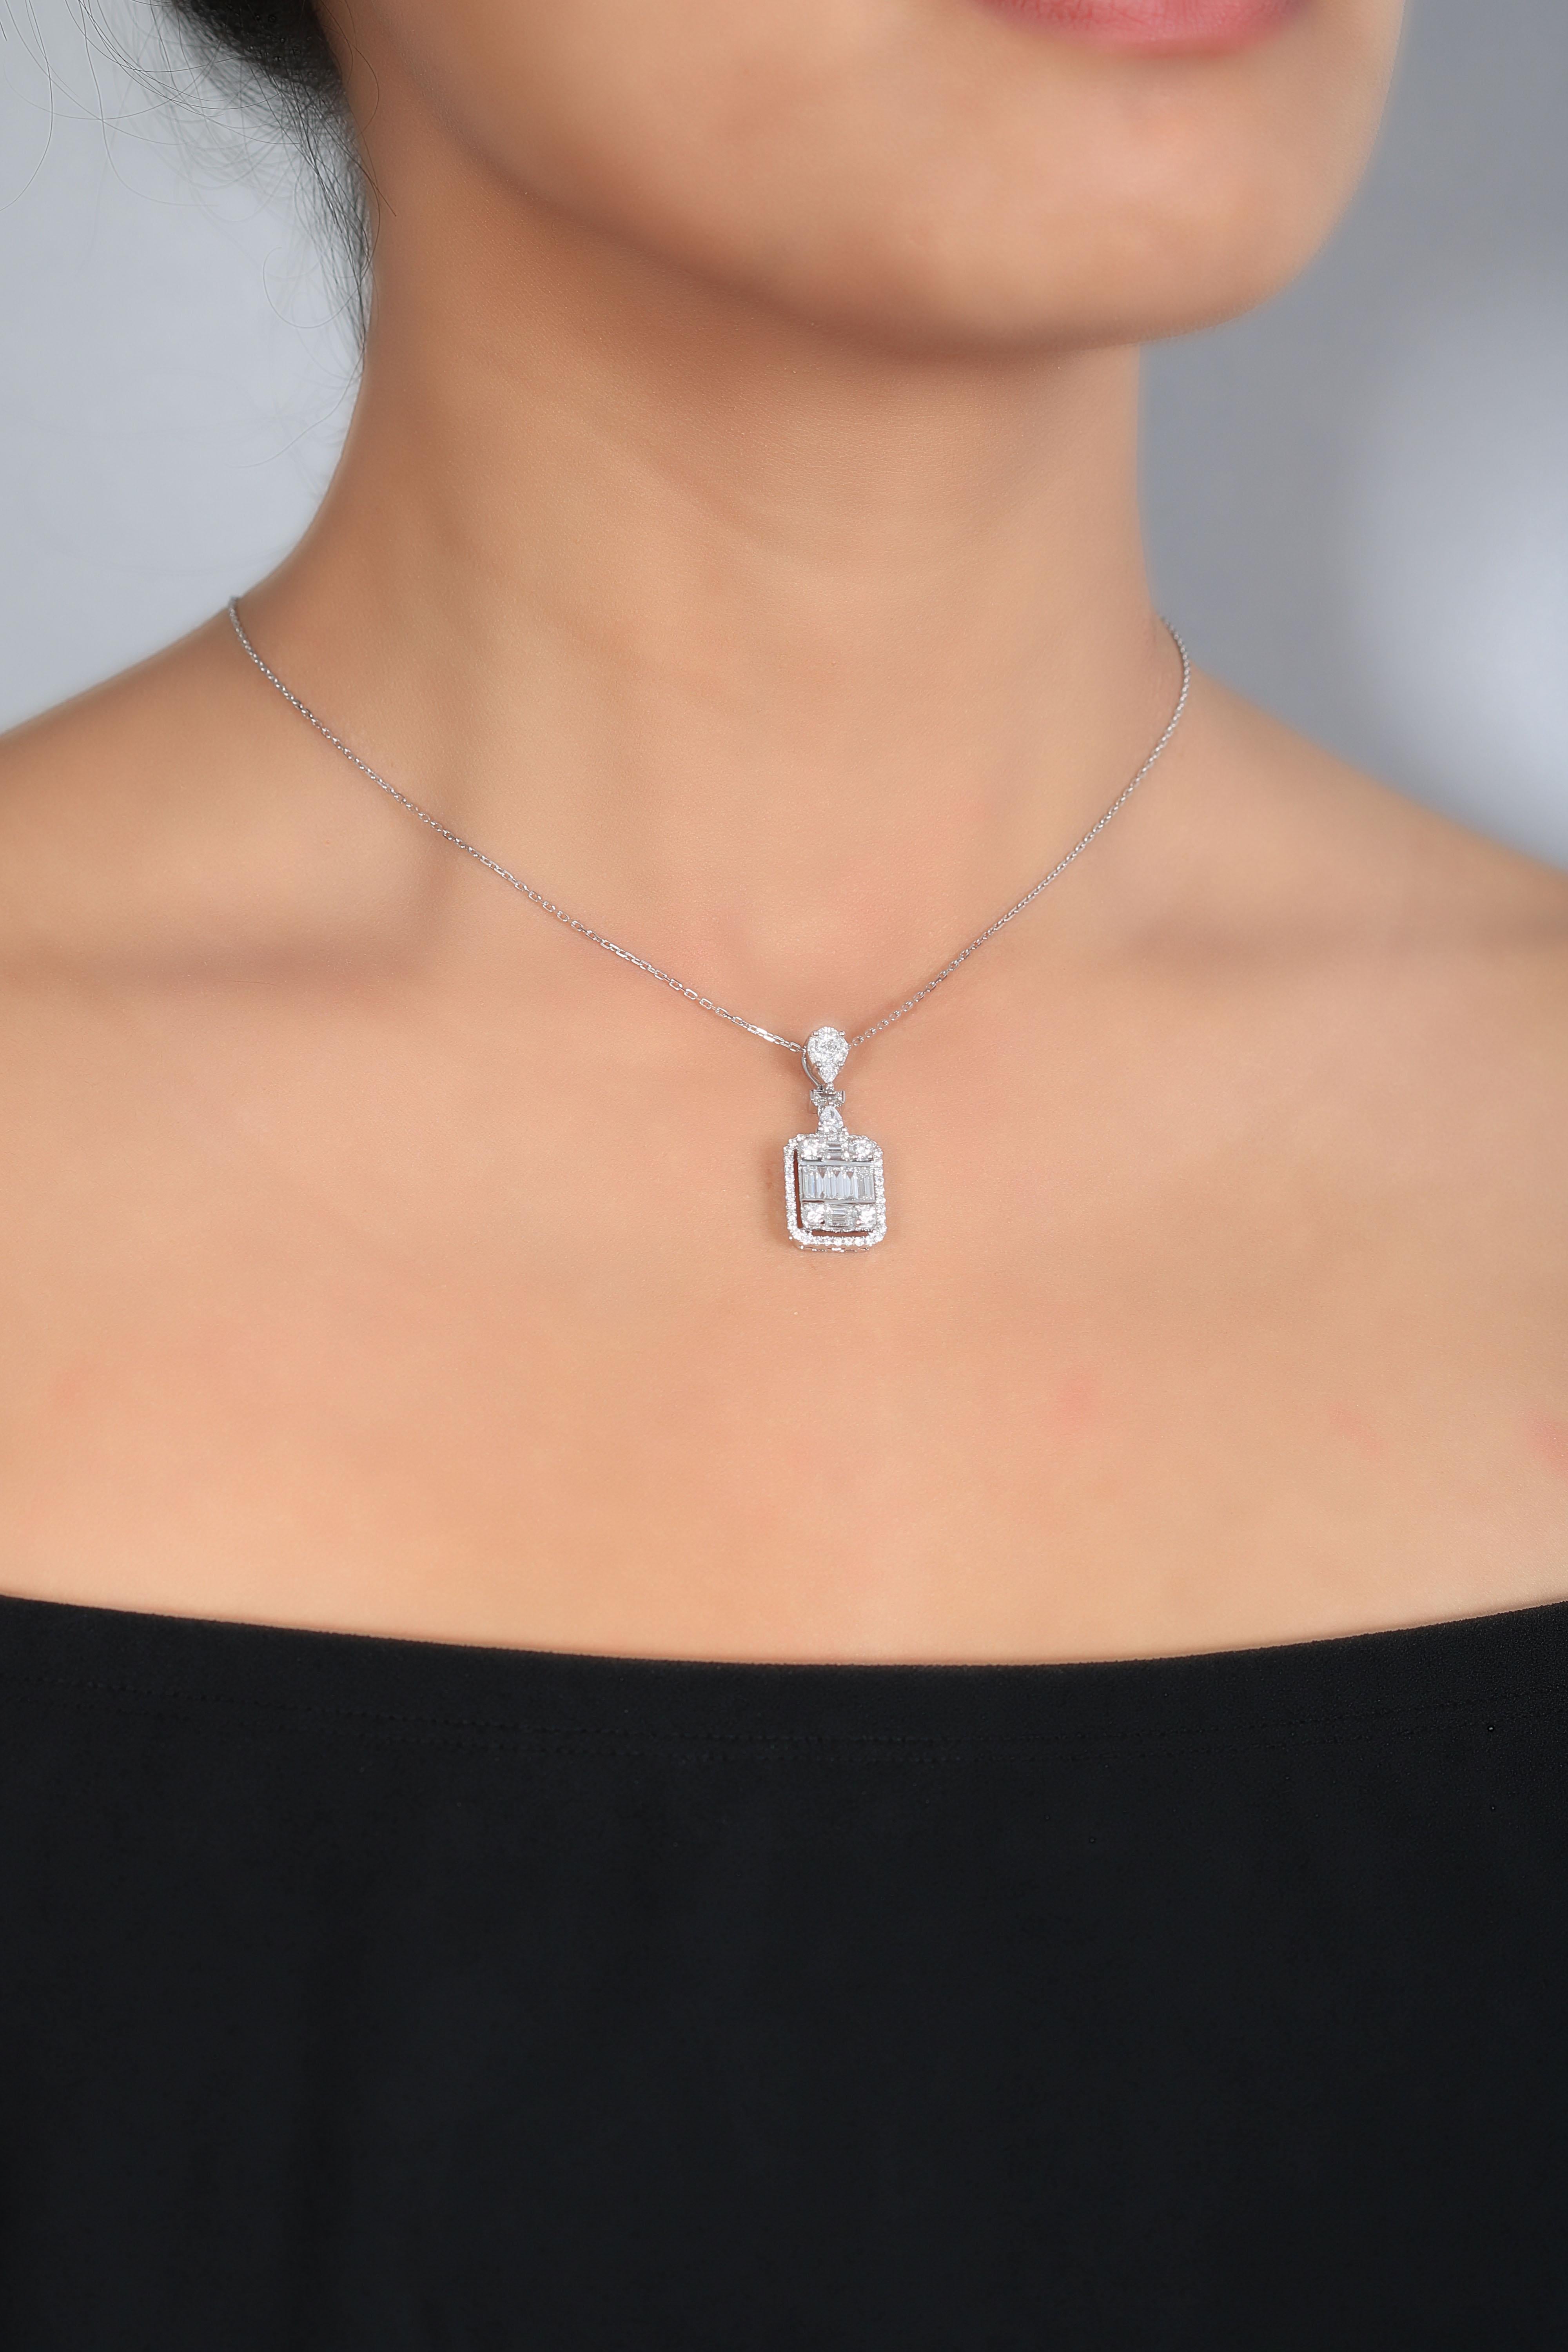 Timeless and unique pendant made by Amwaj jewelry with a mix of Baguette , pear and round shape diamonds that are making an illusion of a big emerald solitaire. perfect choice for casual occasions .
Diamond clarity: VS SI / G H COLOR
Diamond weight: